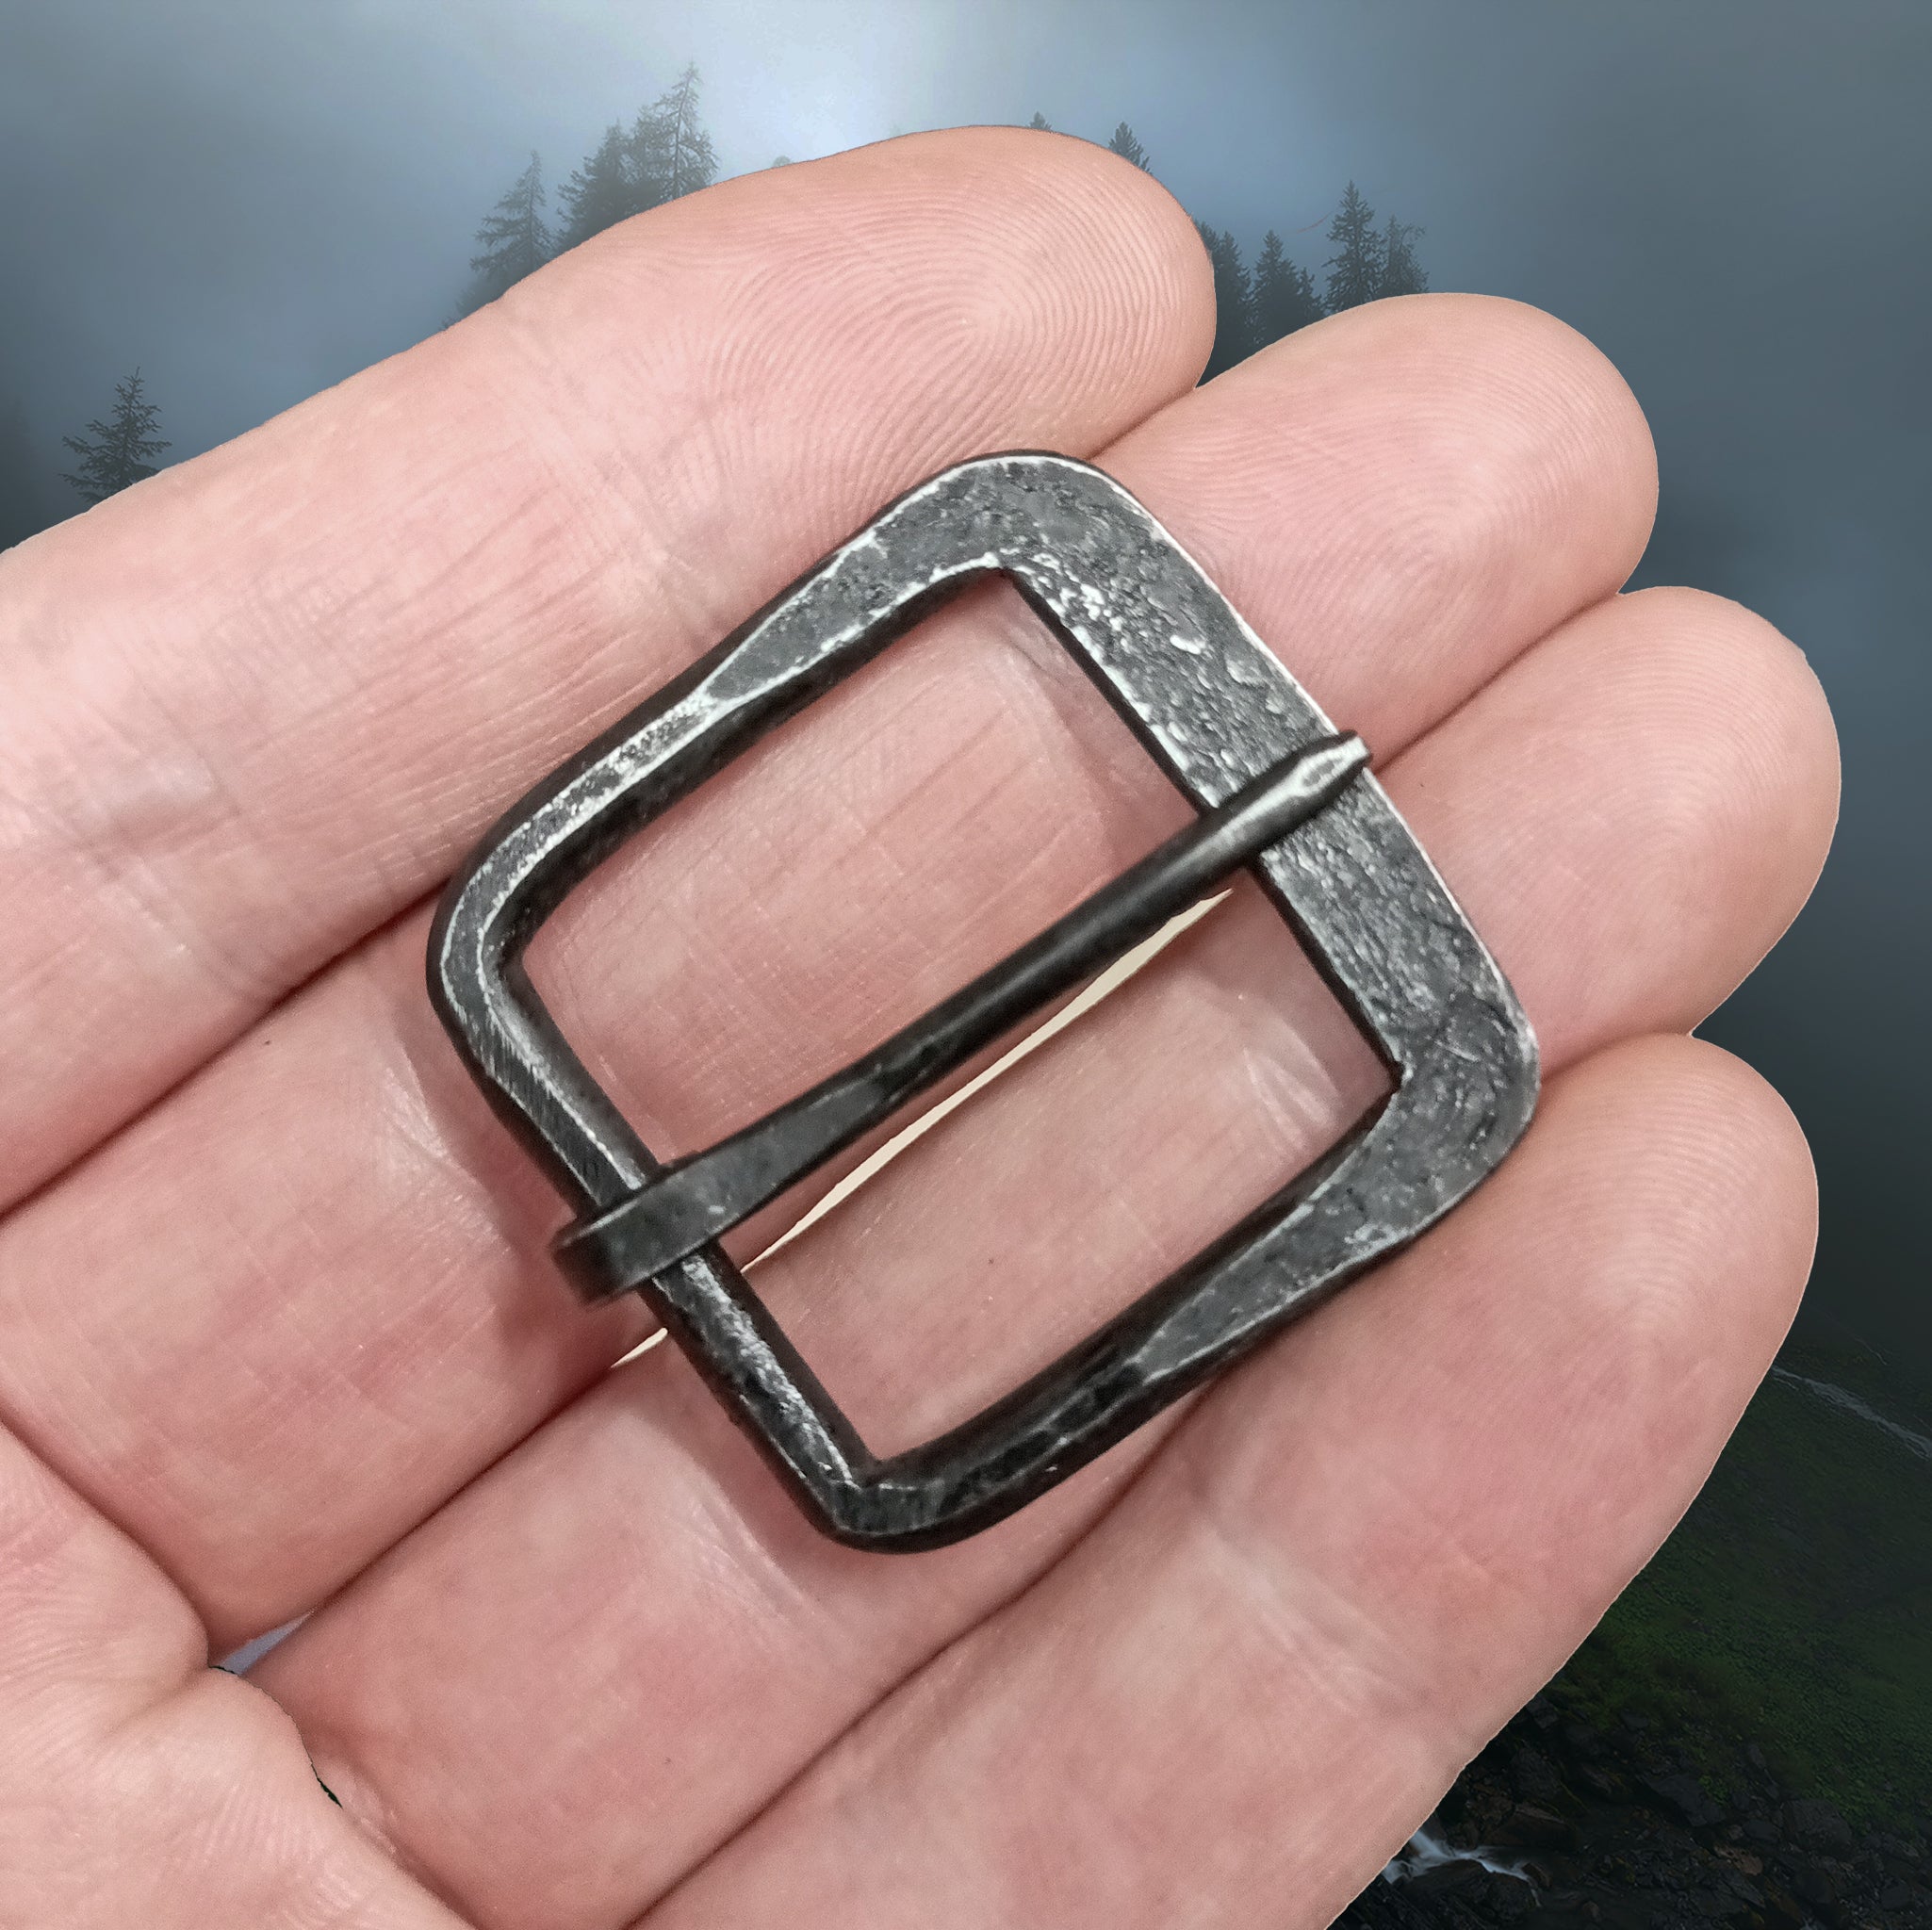 Hand-Forged Iron Viking / Medieval Buckle - 25mm (1 inch) on Hand